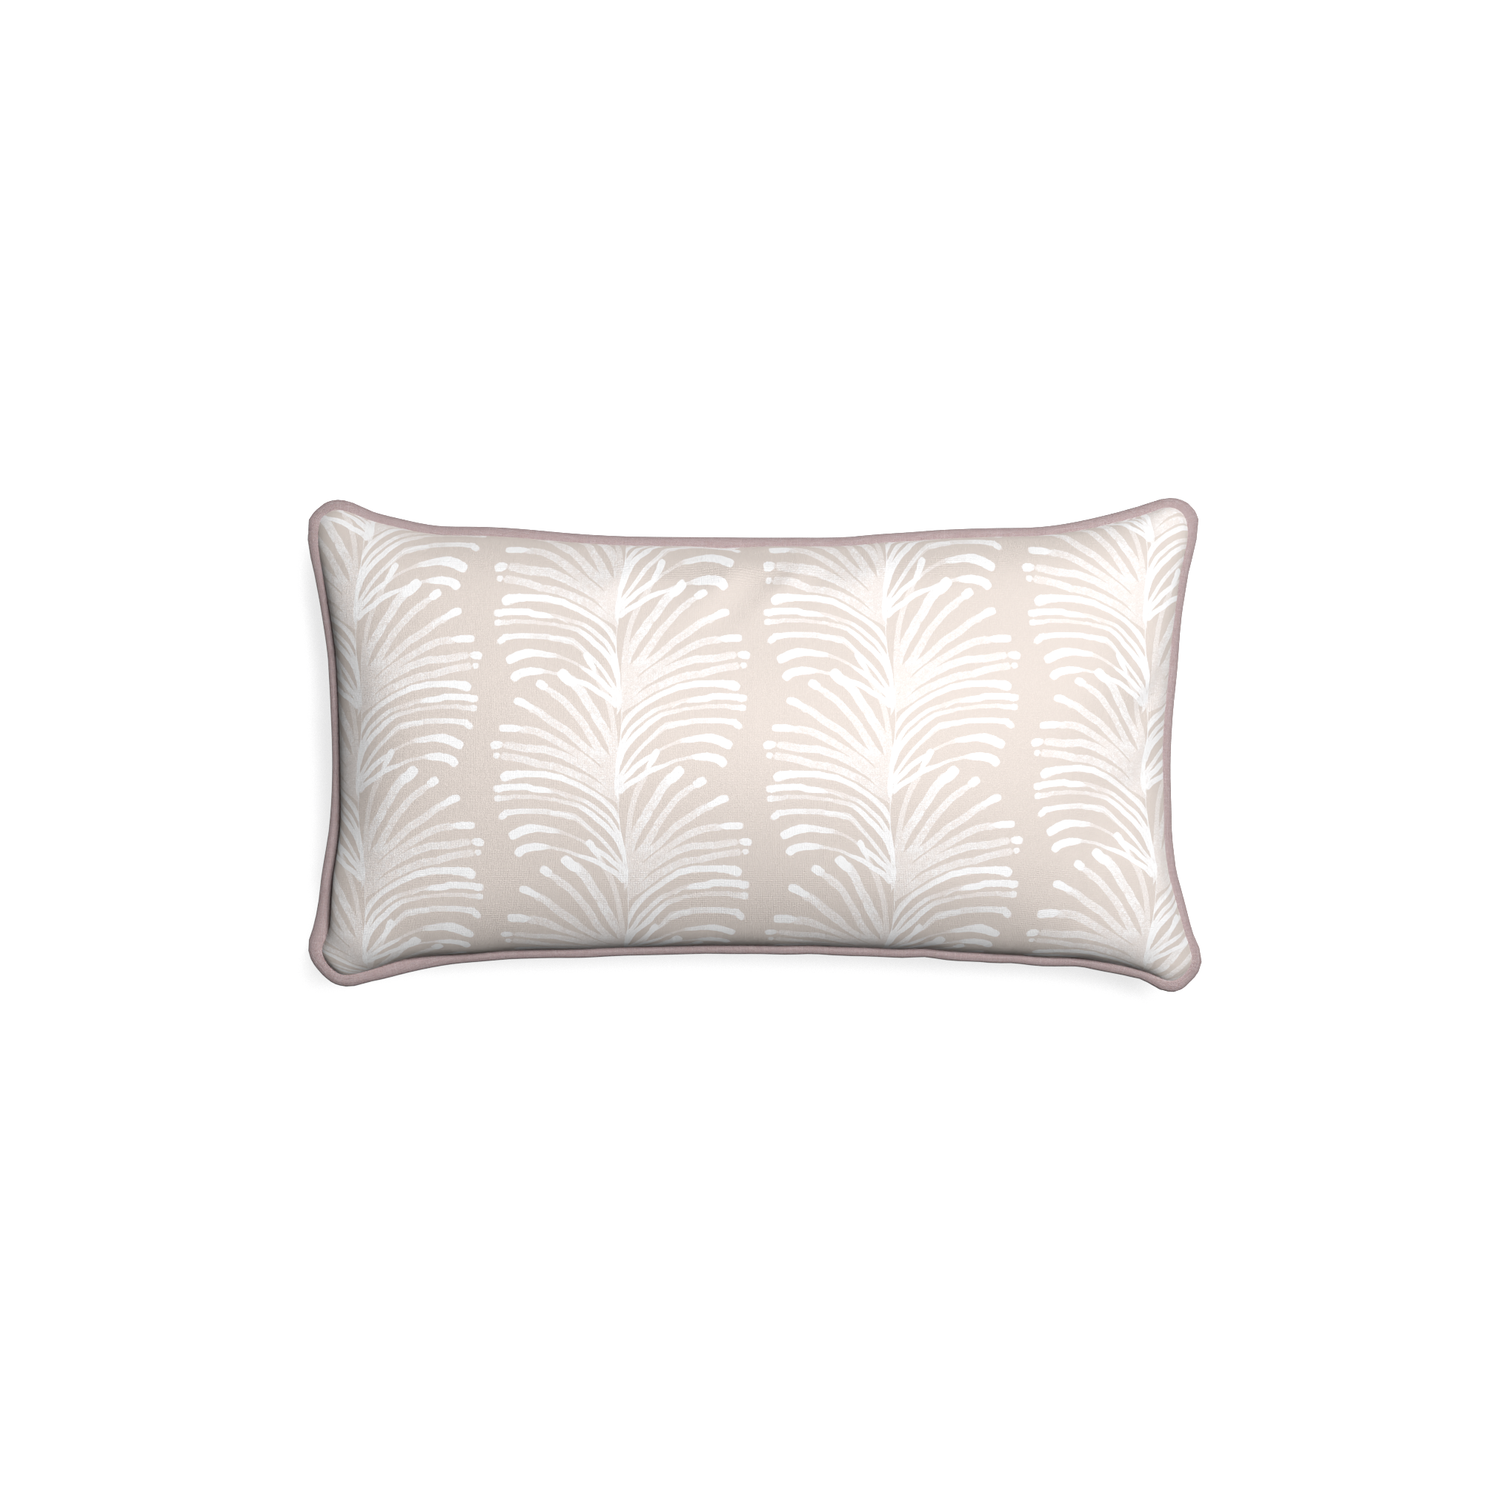 Petite-lumbar emma sand custom sand colored botanical stripepillow with orchid piping on white background